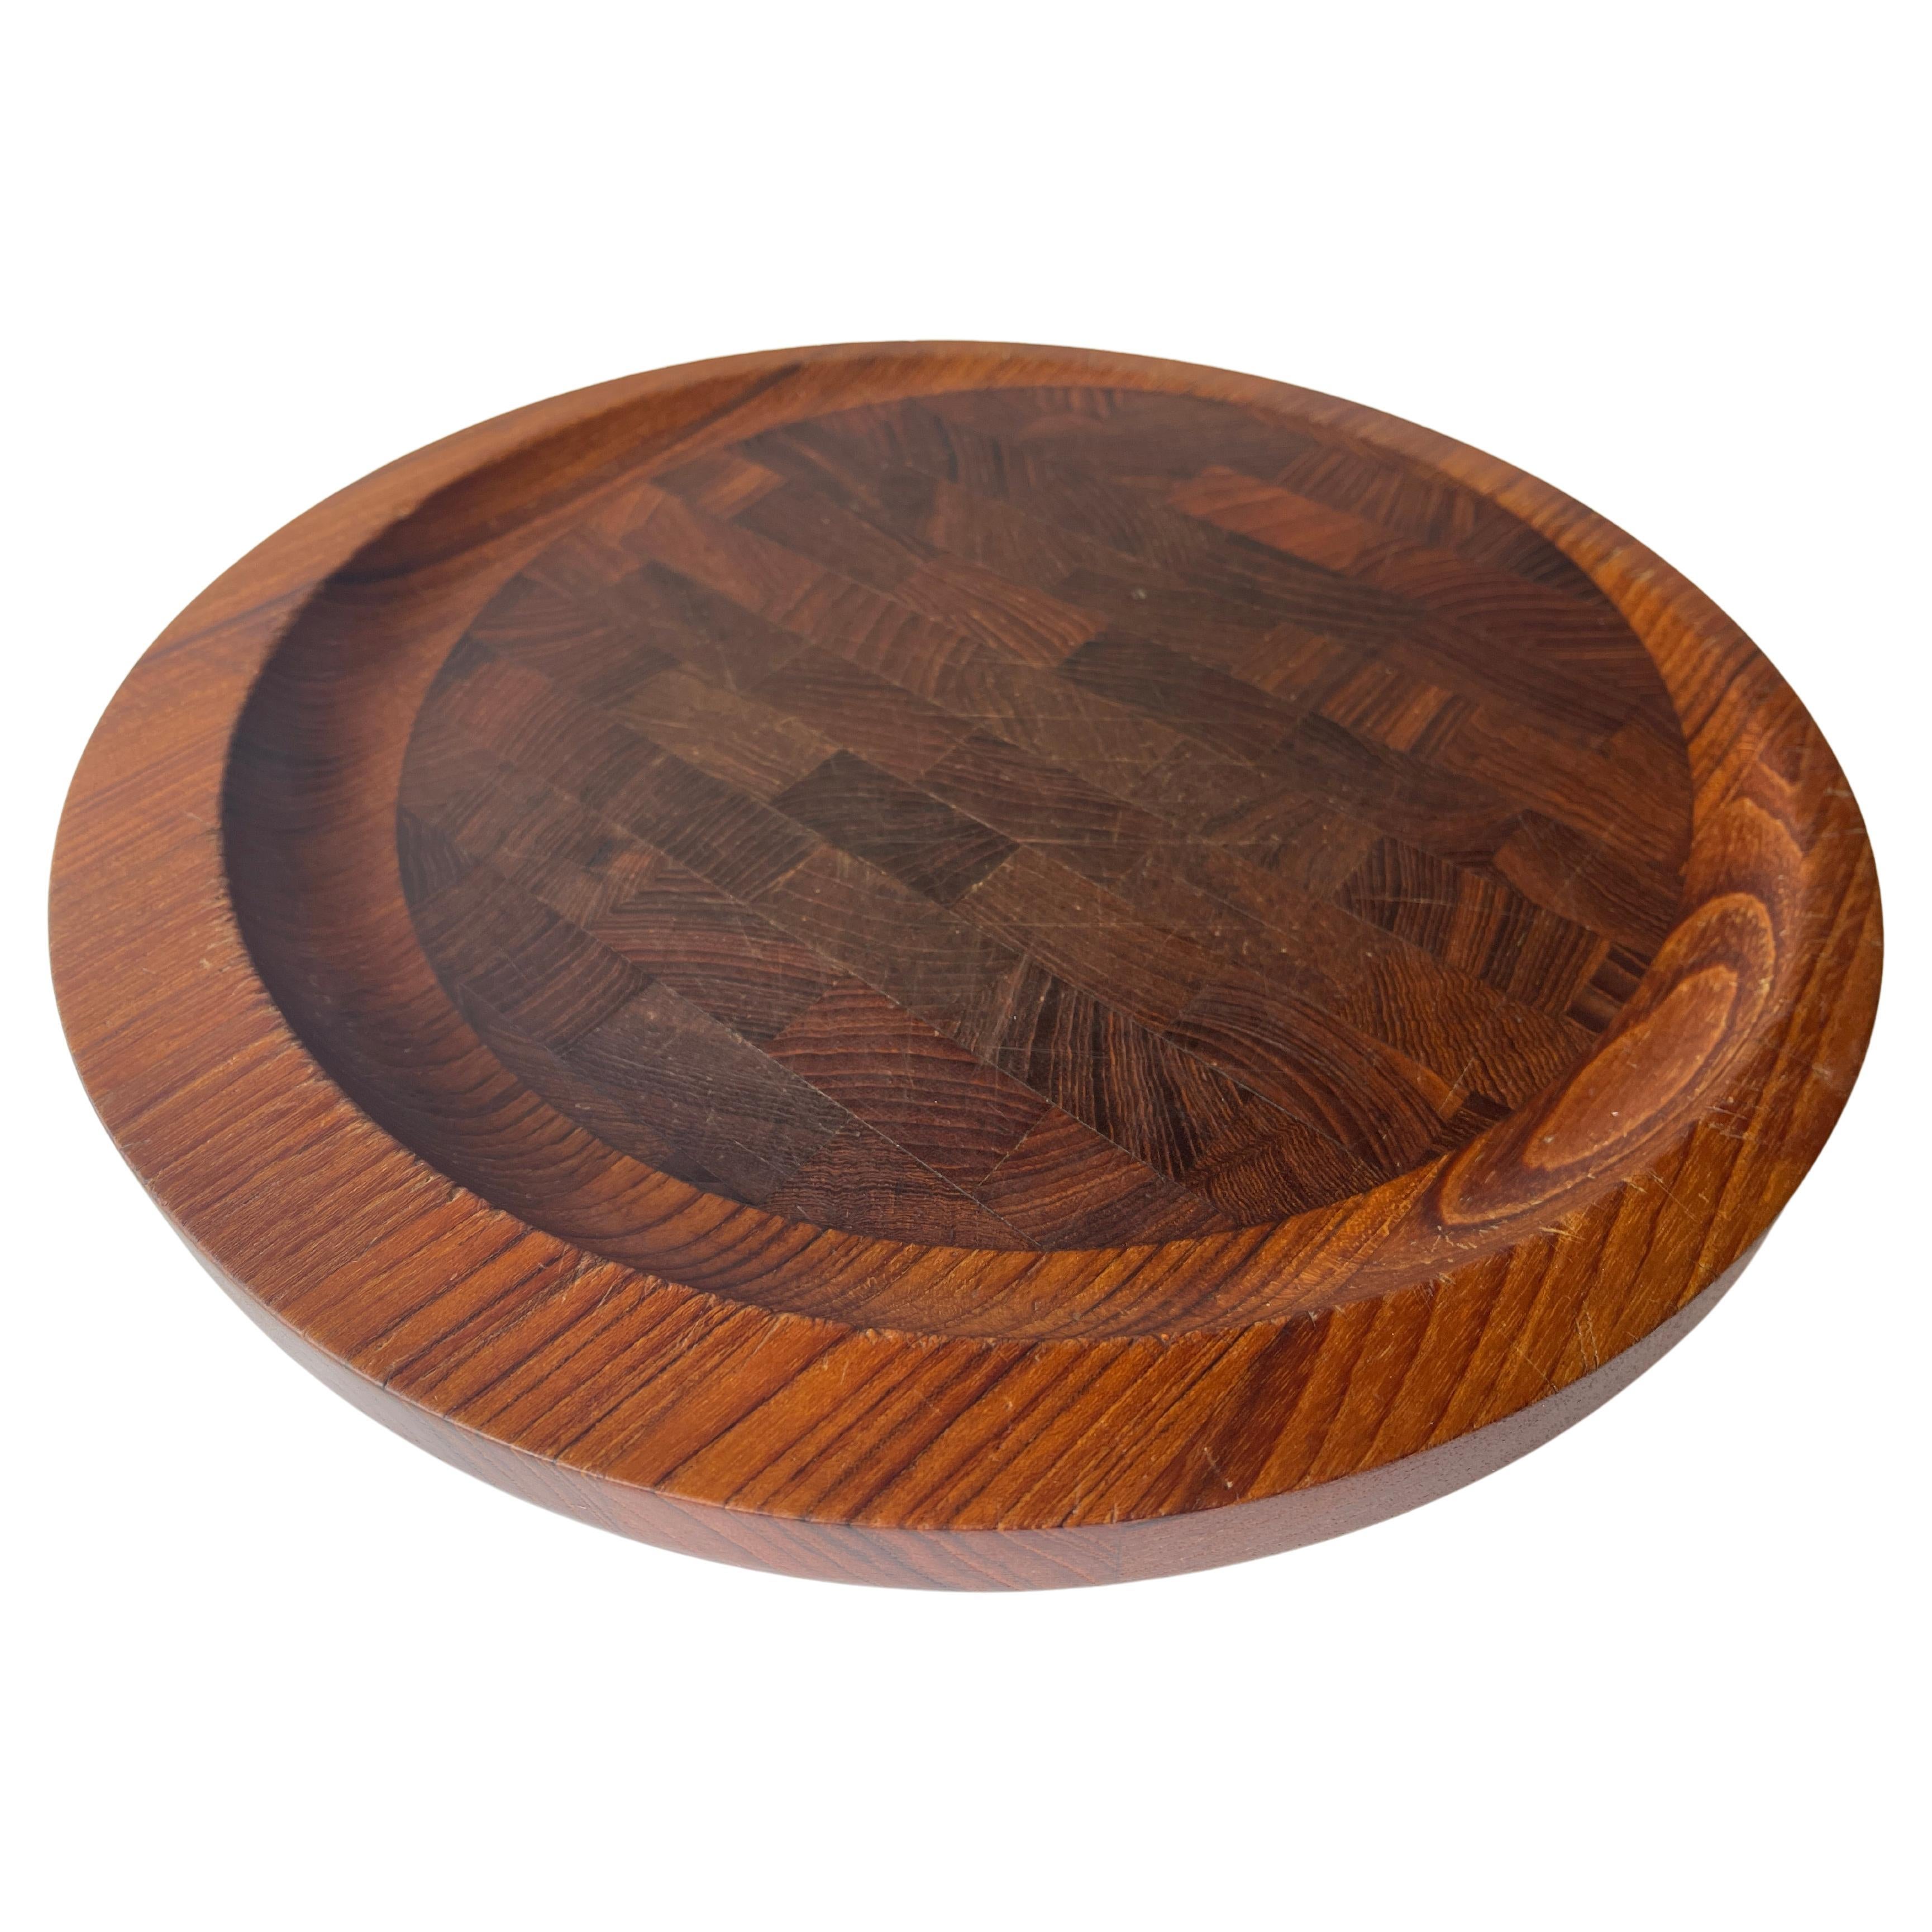 Dansk exotic teak and wenge wood round serving tray with beautiful counterbalanced design. Hand made by renowned Danish designer,
 Jens Quistgaard, in Denmark. Engraved hallmark on bottom of tray.